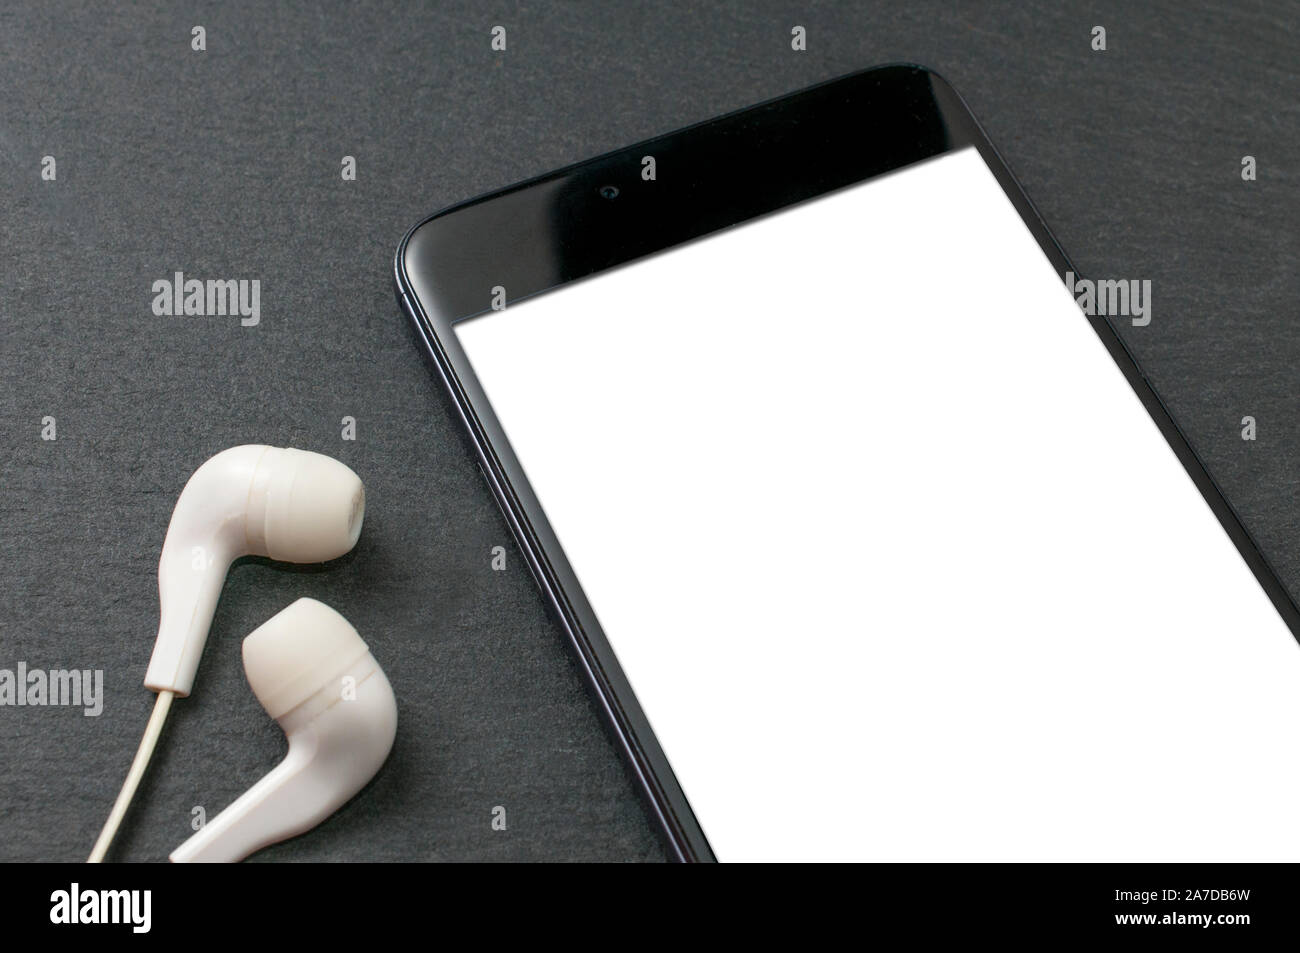 Blank screen smartphone on stone table with a set of white earphones Stock Photo